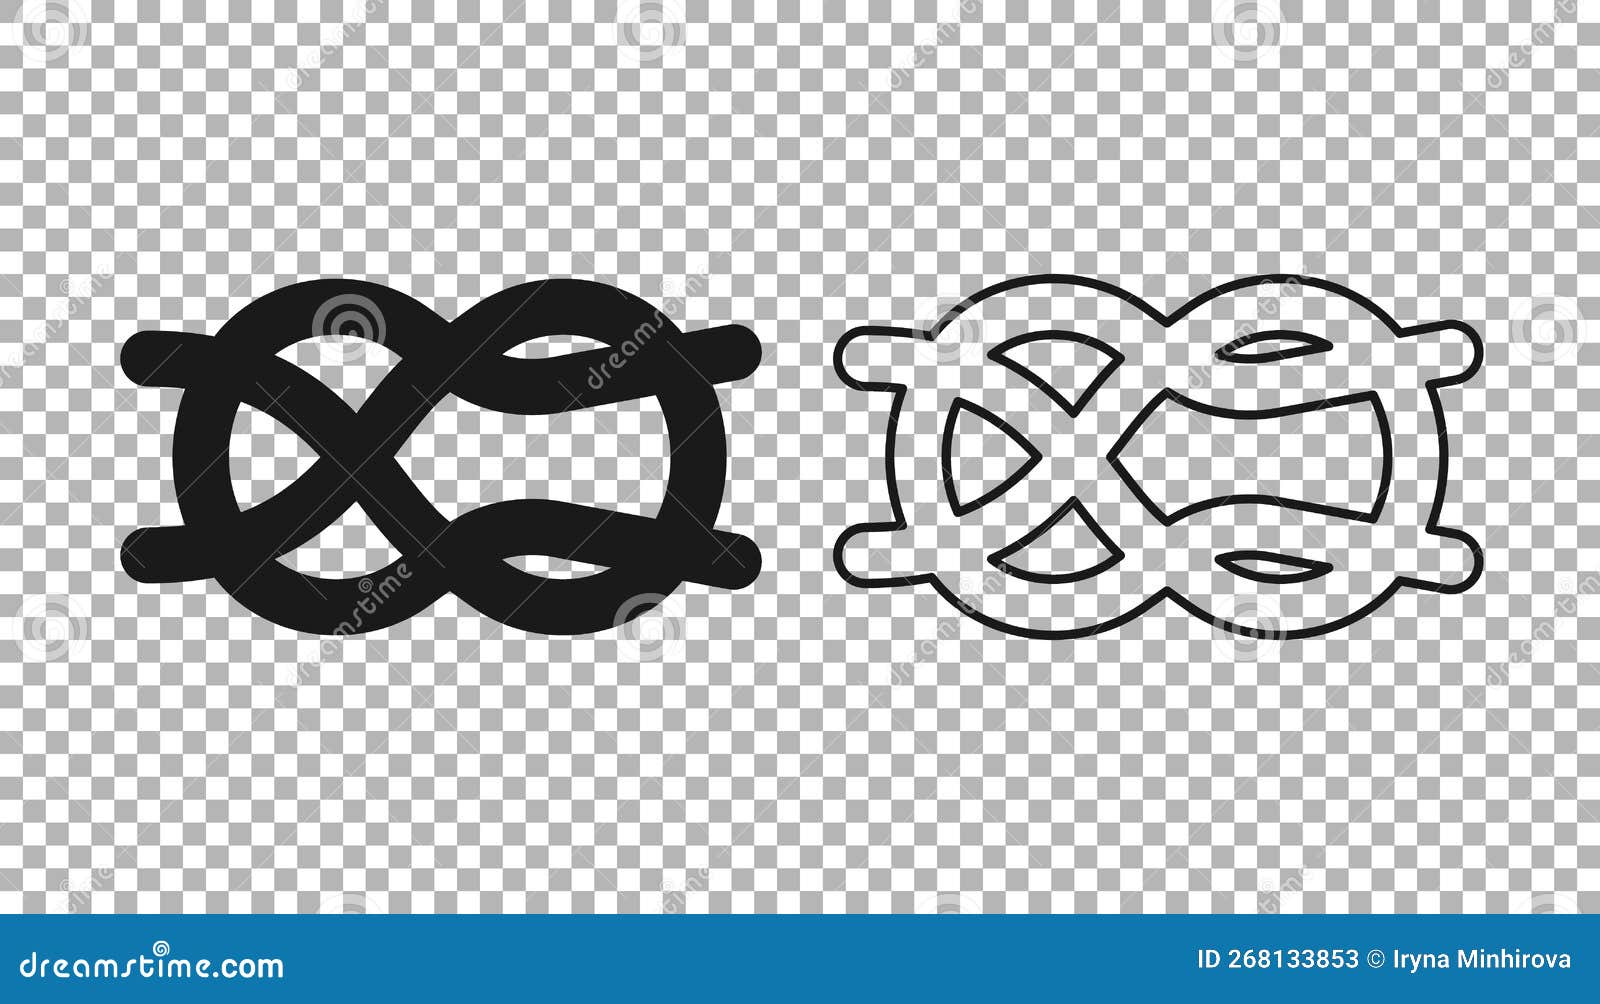 Black Nautical Rope Knots Icon Isolated on Transparent Background. Rope  Tied in a Knot Stock Vector - Illustration of loop, object: 268133853